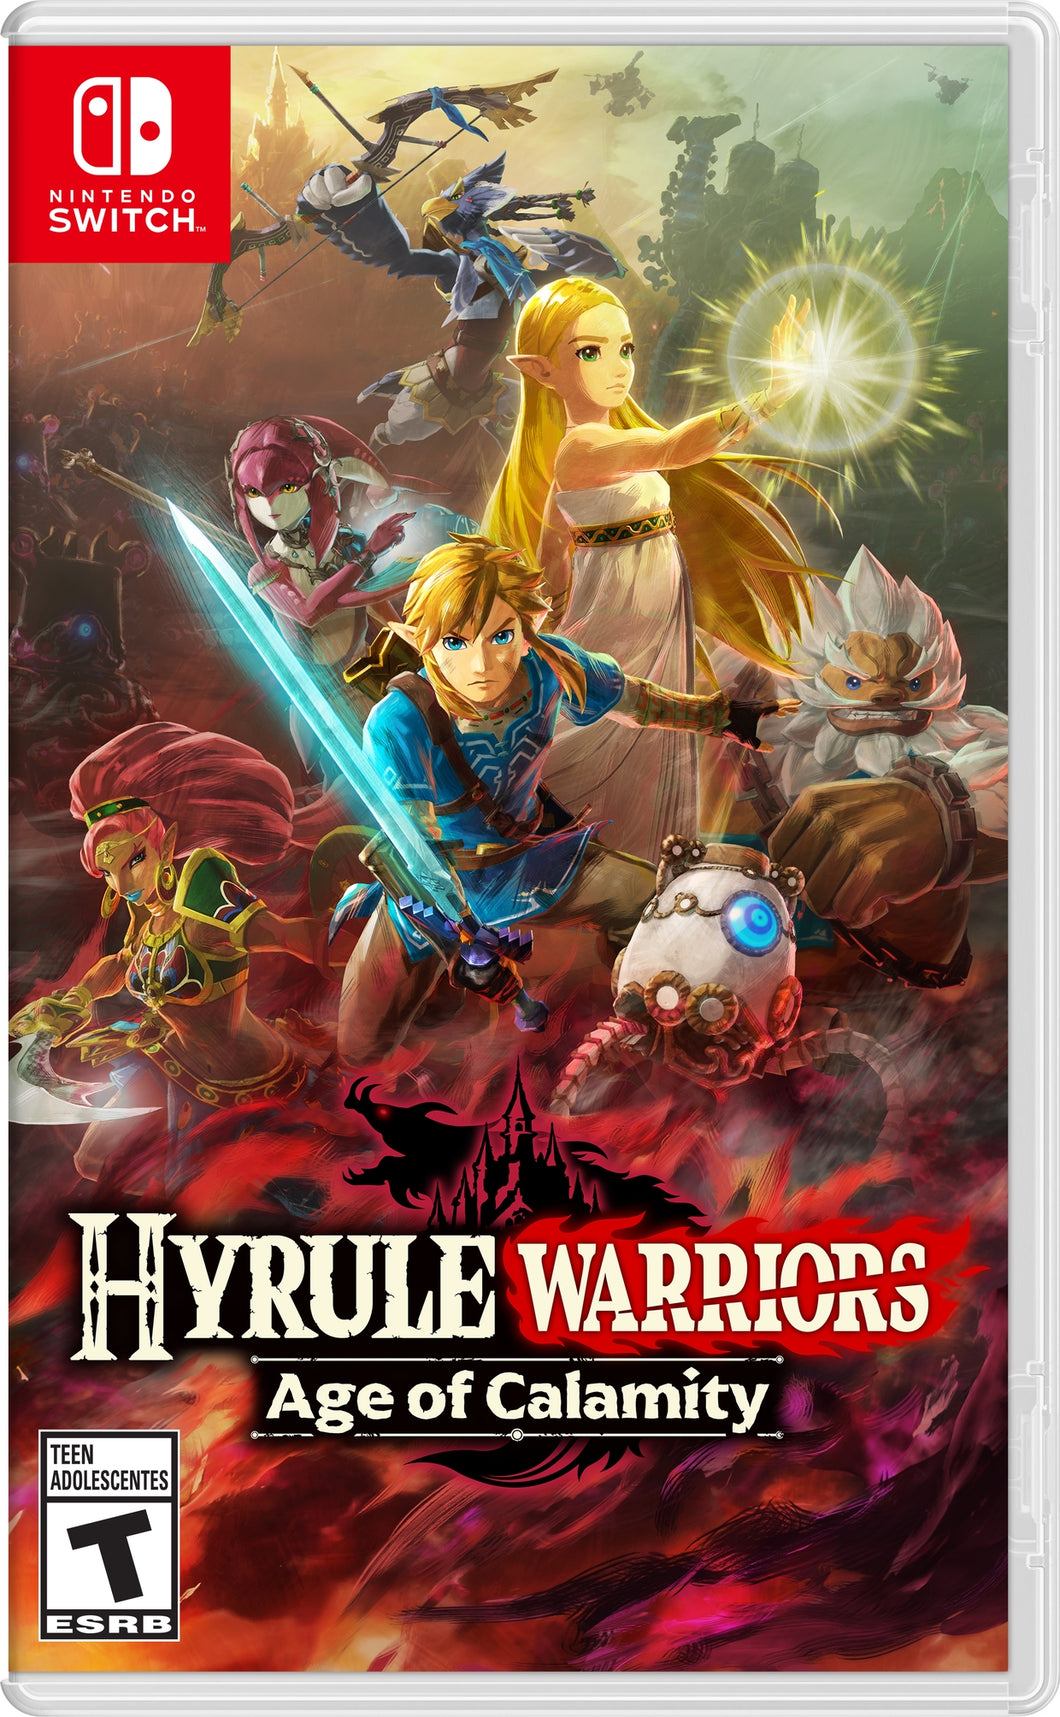 Hyrule Warriors: Age of Calamity - Switch